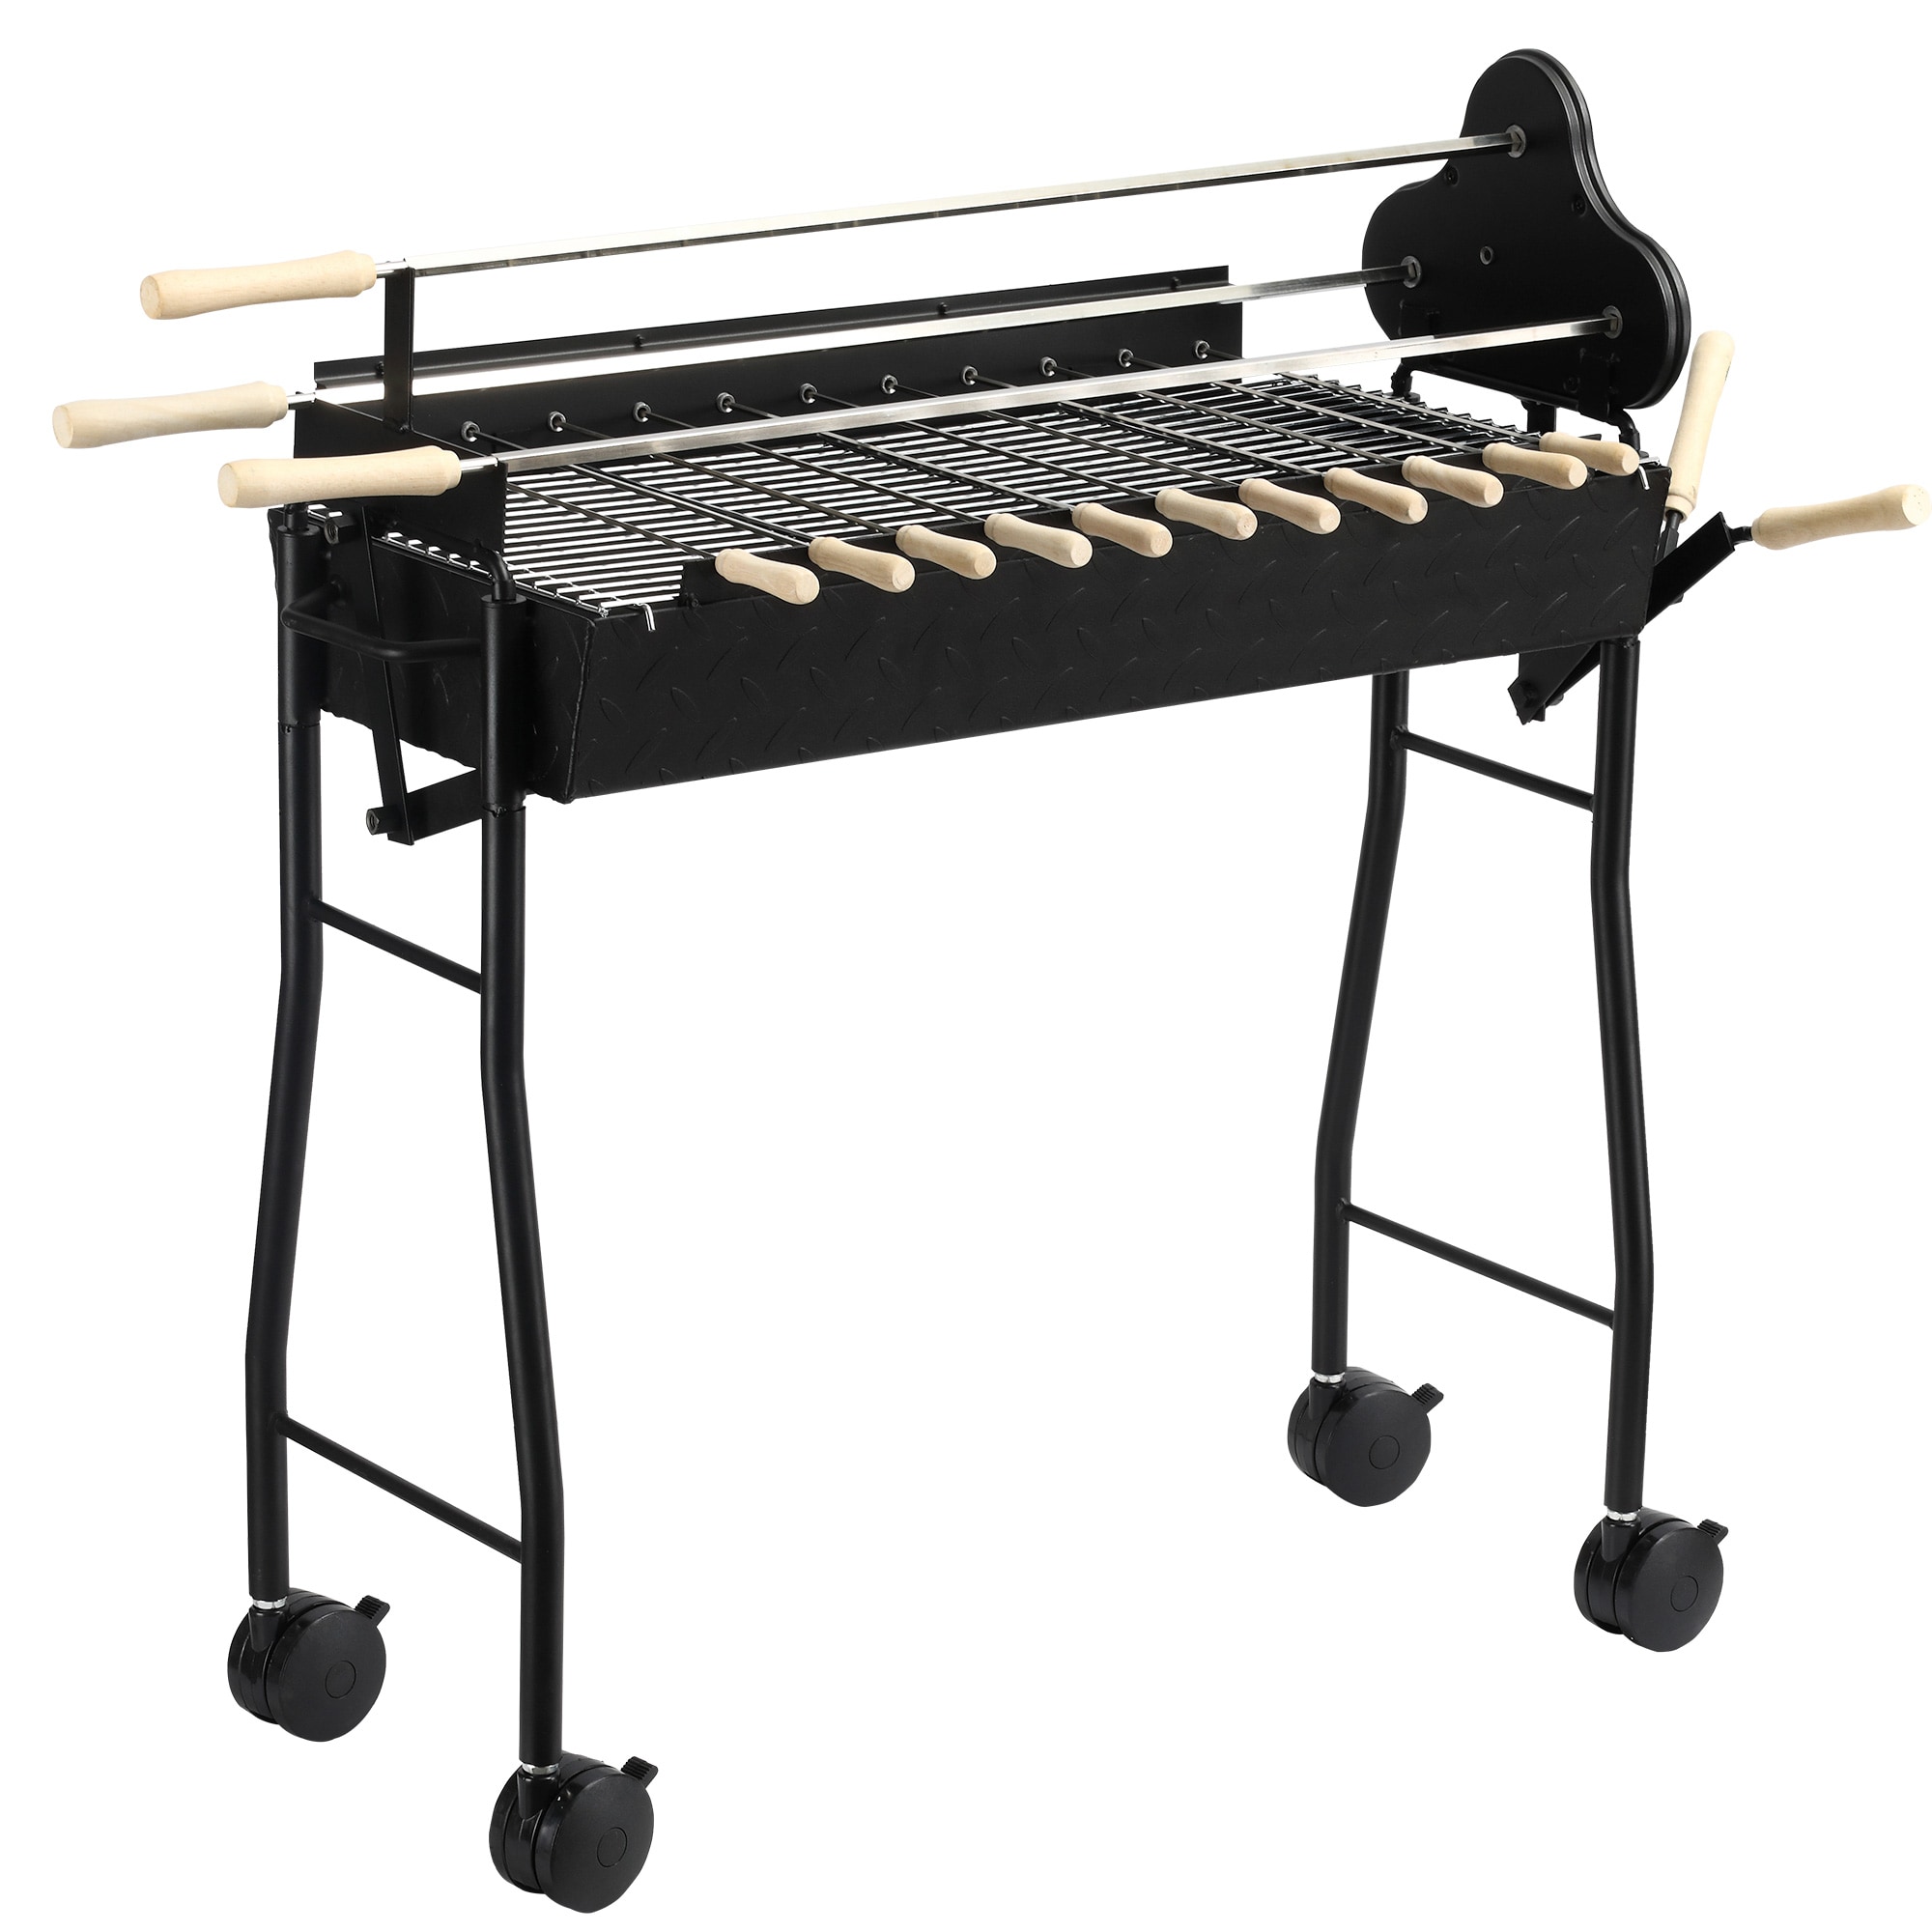 Portable outdoor charcoal grill Grills at Lowes.com